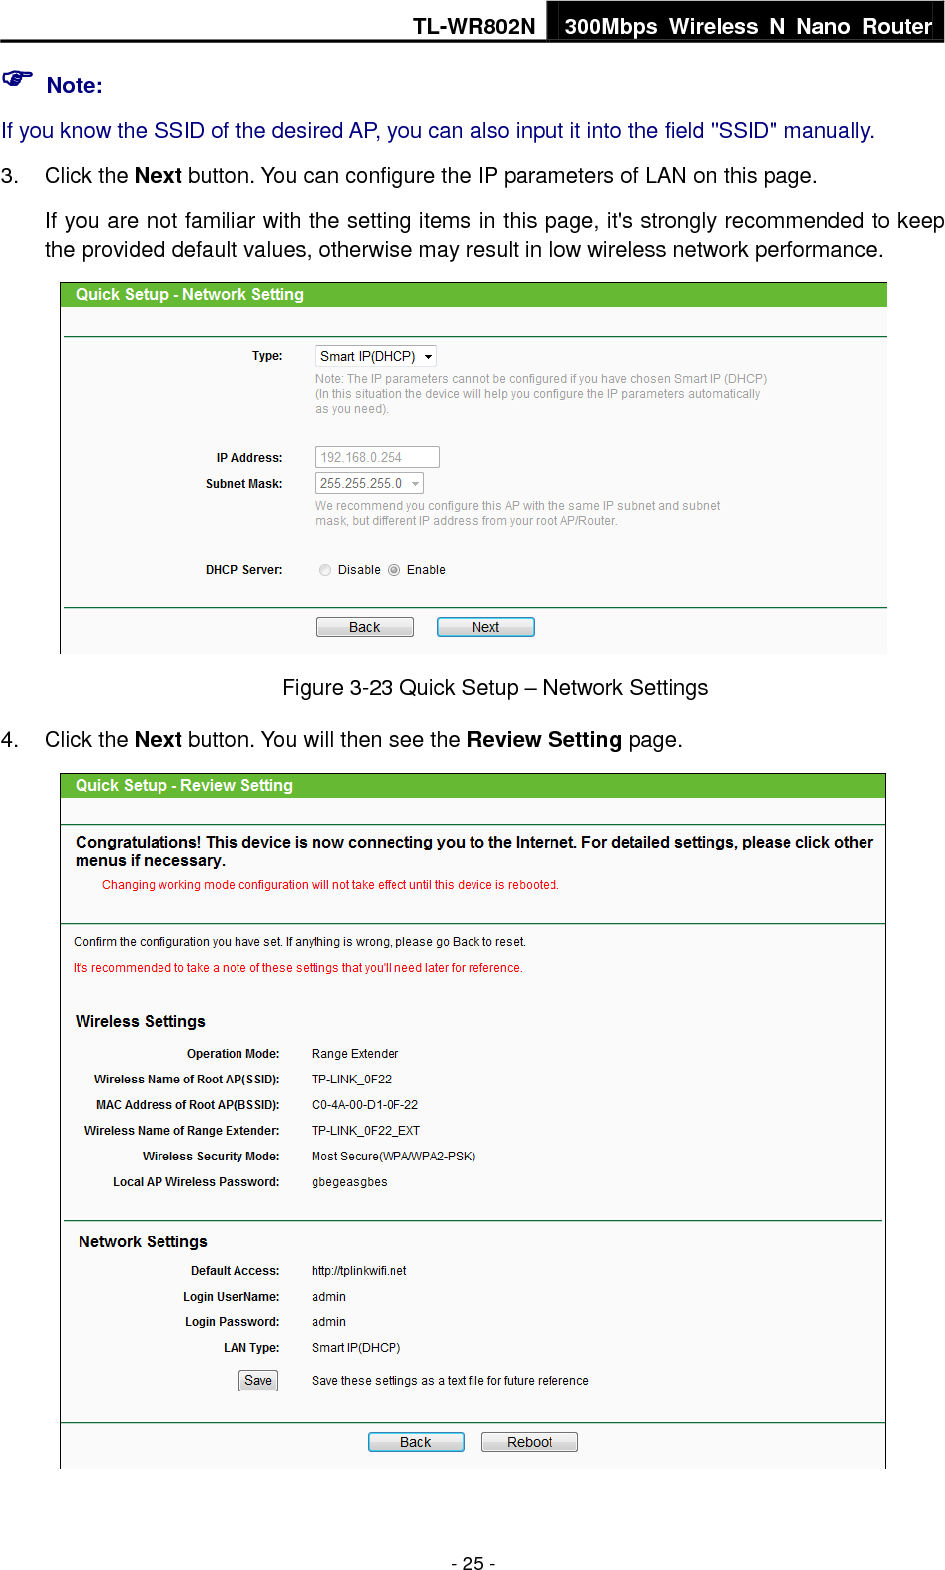 TL-WR802N 300Mbps  Wireless  N  Nano  Router  - 25 -  Note: If you know the SSID of the desired AP, you can also input it into the field &quot;SSID&quot; manually. 3.  Click the Next button. You can configure the IP parameters of LAN on this page. If you are not familiar with the setting items in this page, it&apos;s strongly recommended to keep the provided default values, otherwise may result in low wireless network performance.  Figure 3-23 Quick Setup – Network Settings 4.  Click the Next button. You will then see the Review Setting page.  